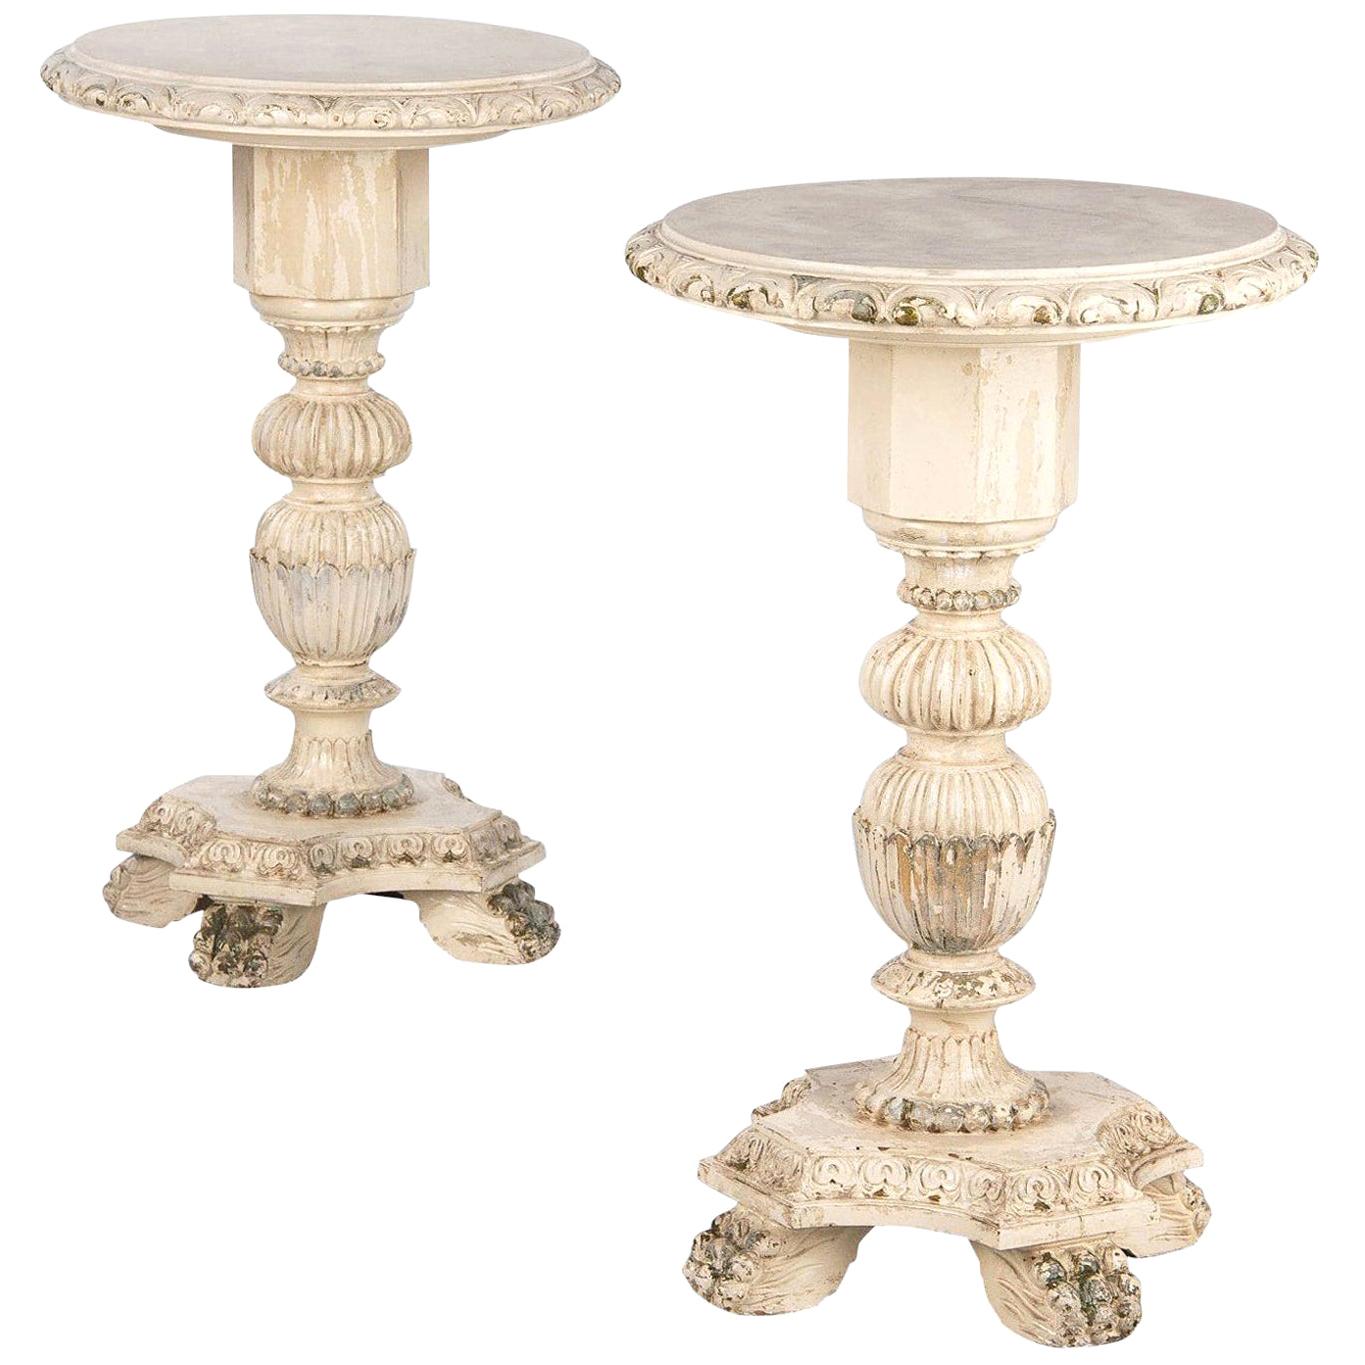 A pair of vintage side table guéridon in the Renaissance Revival style with distressed paint, Italian, circa 1950. Probably beechwood construction with cream colored paint throughout and hits of old gilding and colored paint underneath. Quatrefoil